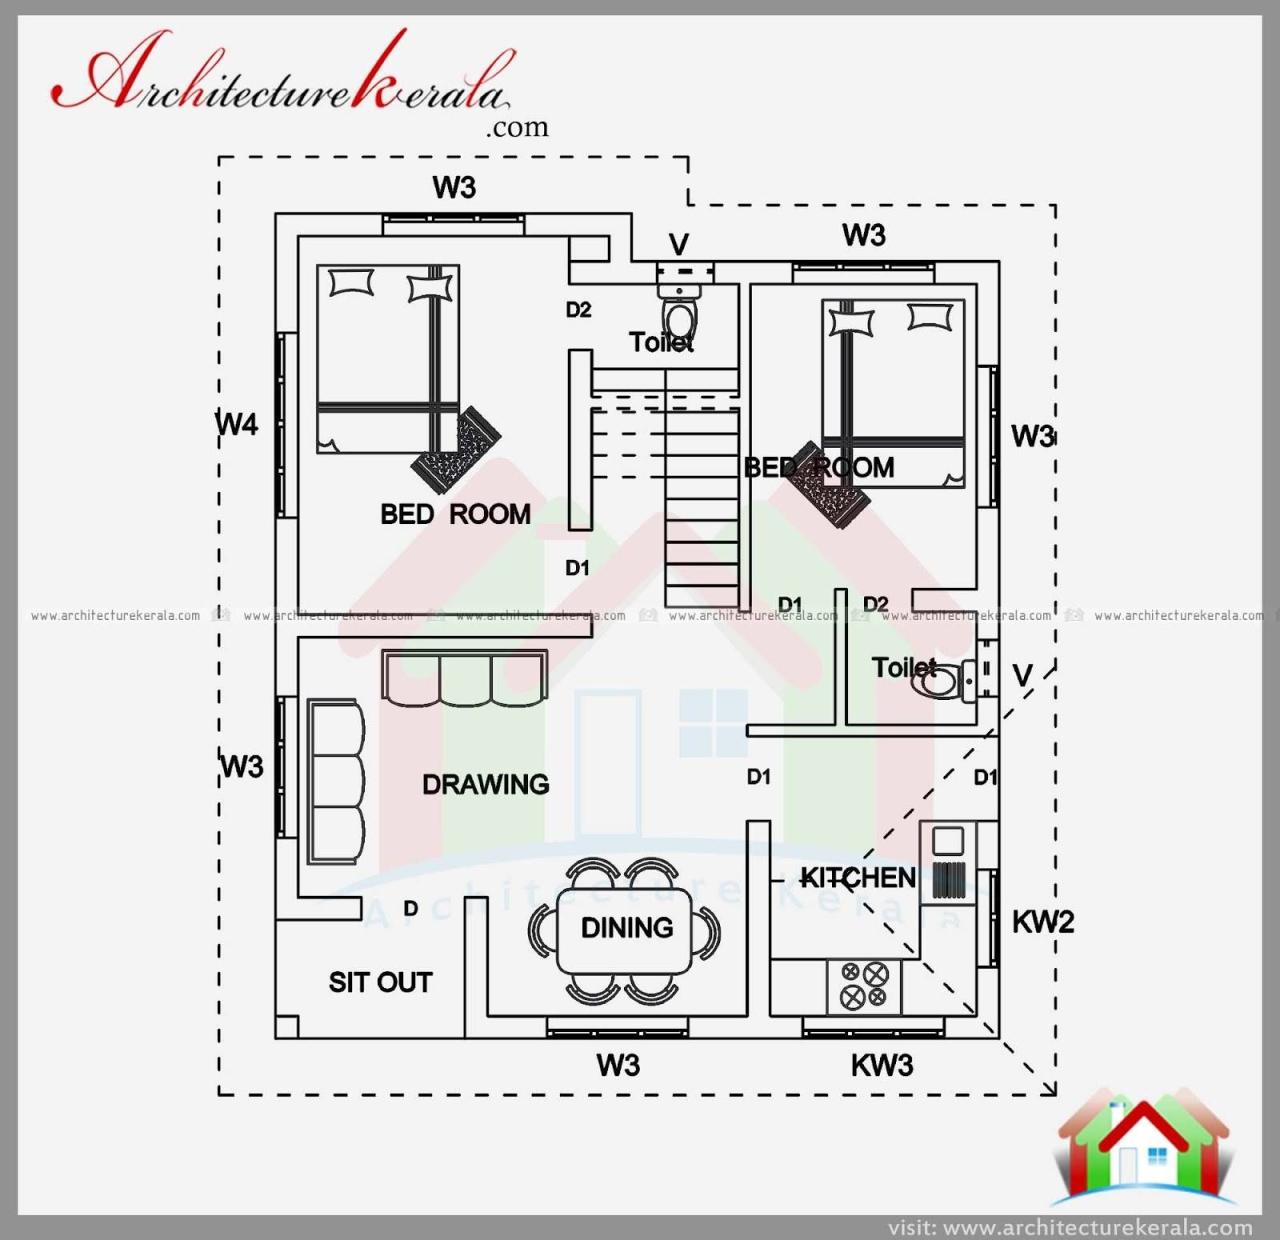 House Plans Images 700 Sq Ft | Small Modern House Plans, 2 Bedroom House  Plans, Bedroom House Plans